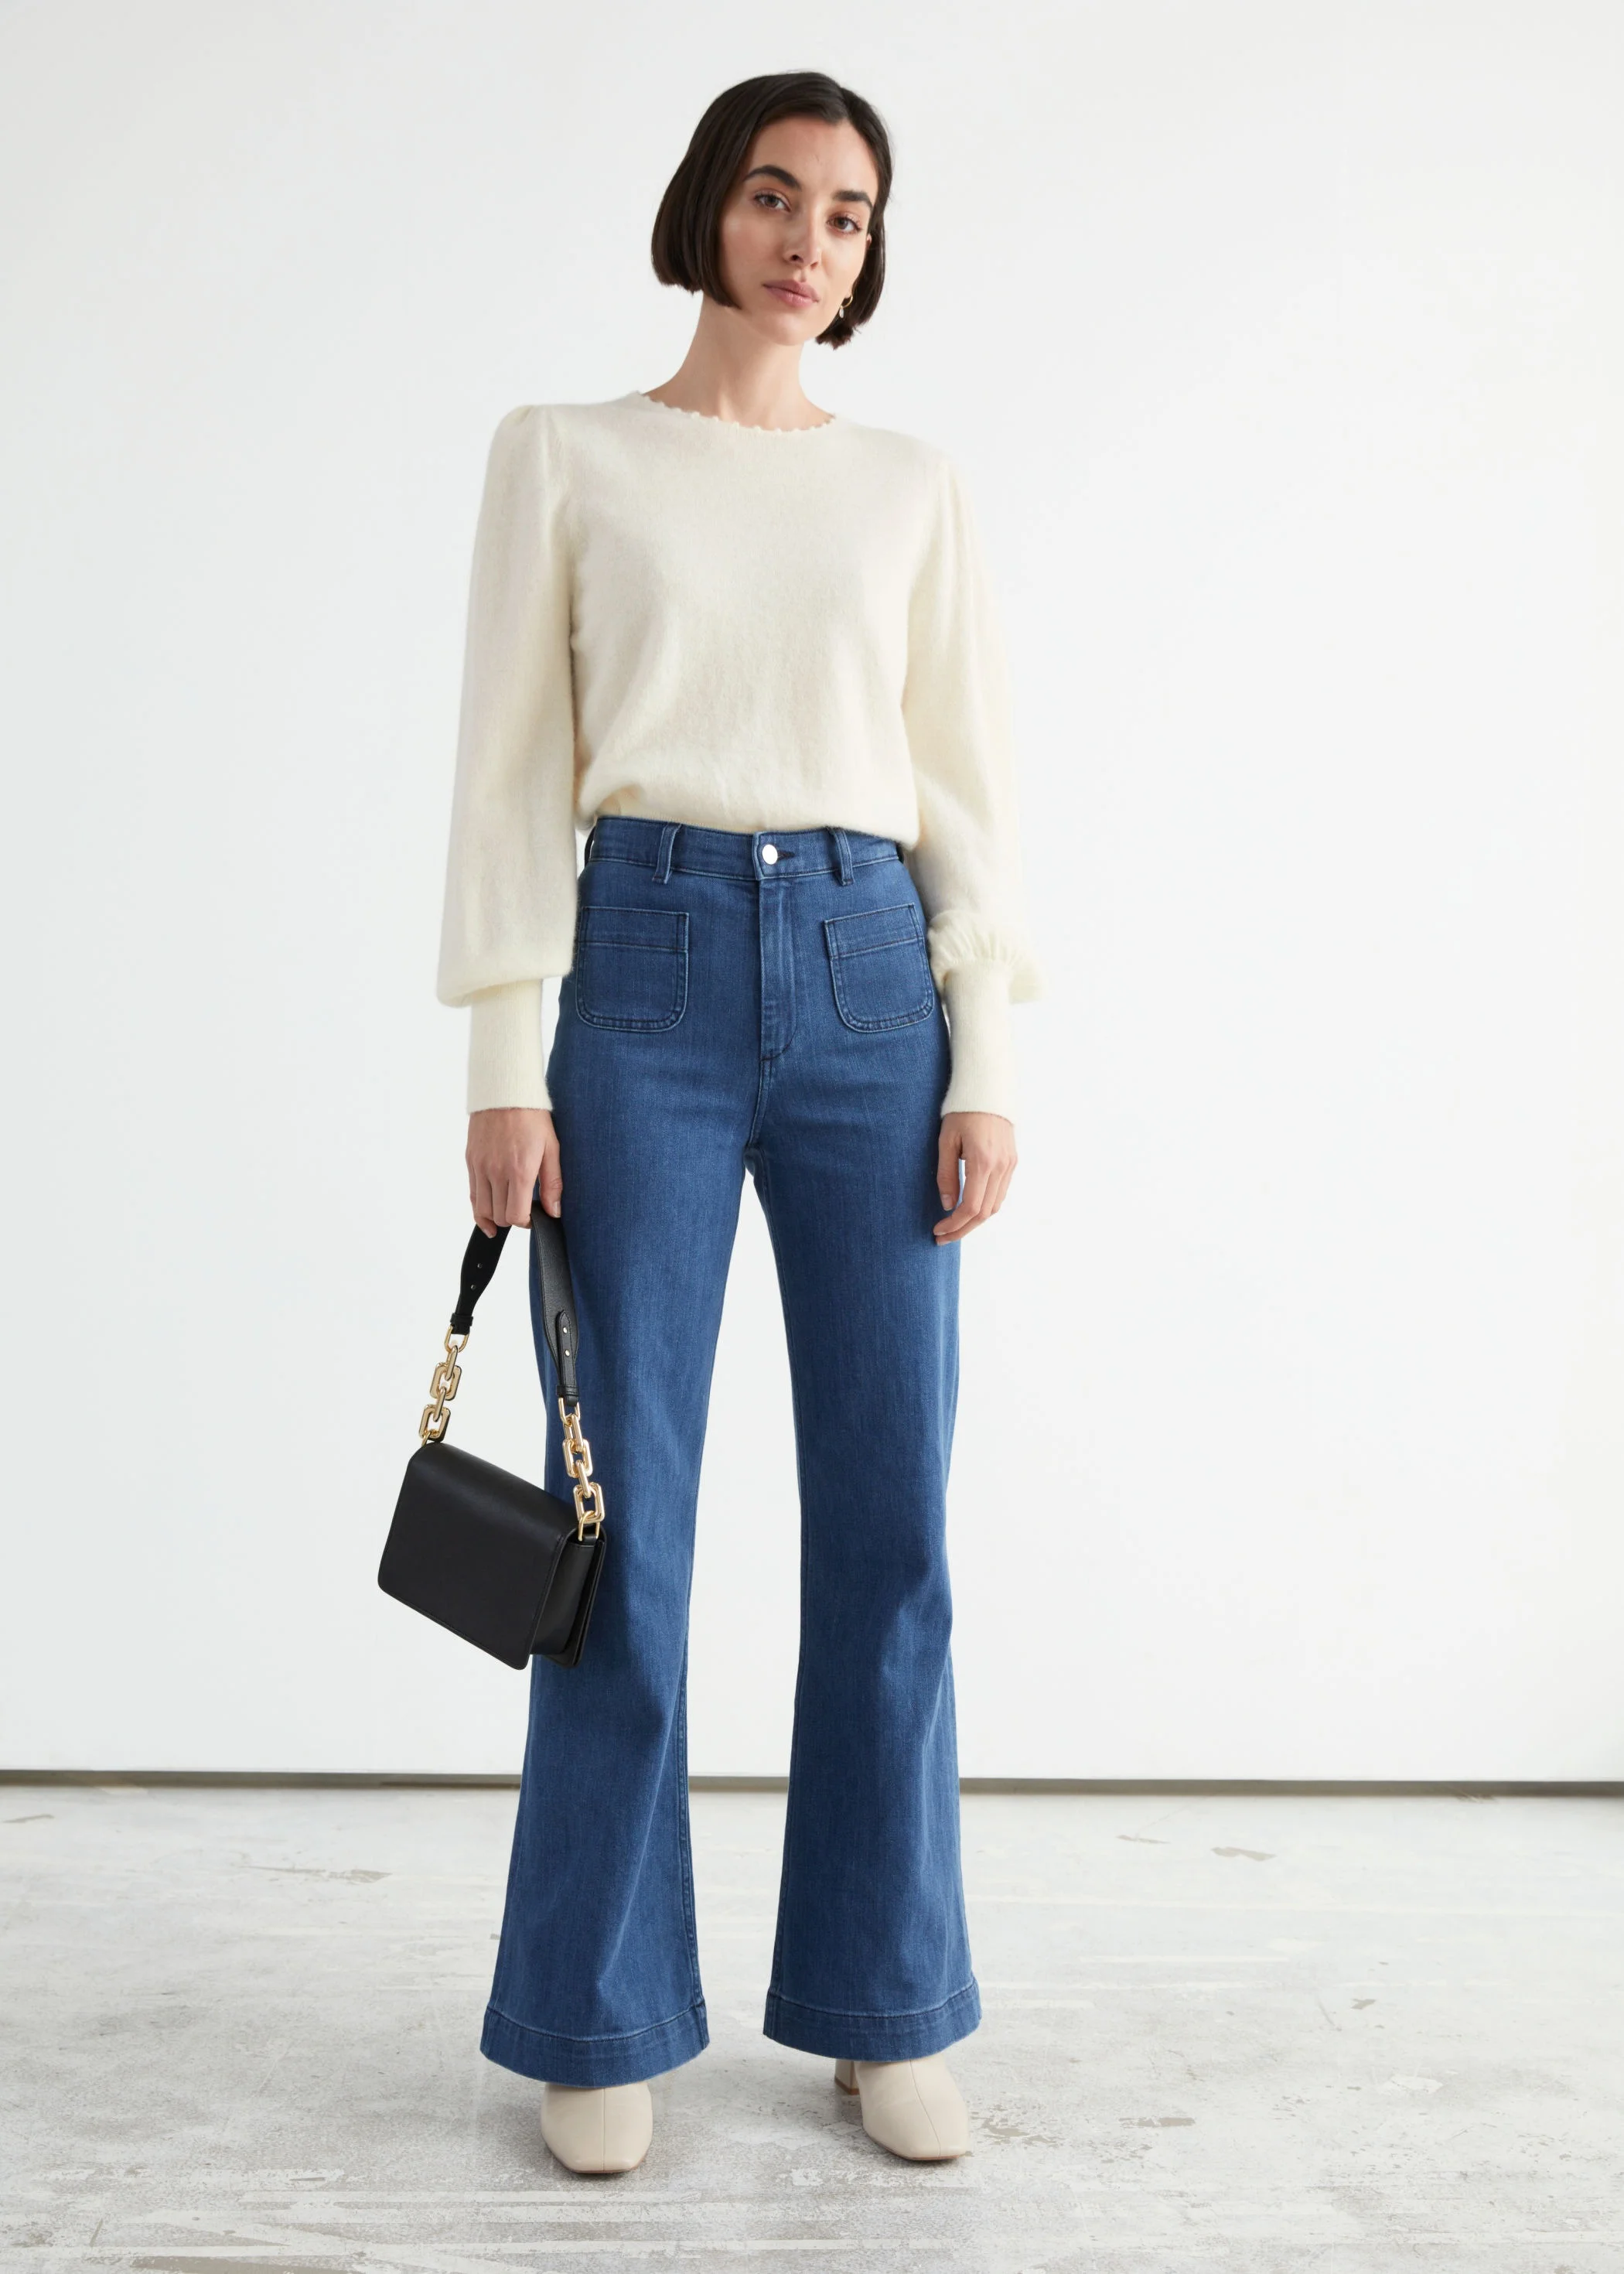 amp; Other Stories + High Waisted Flare Jeans